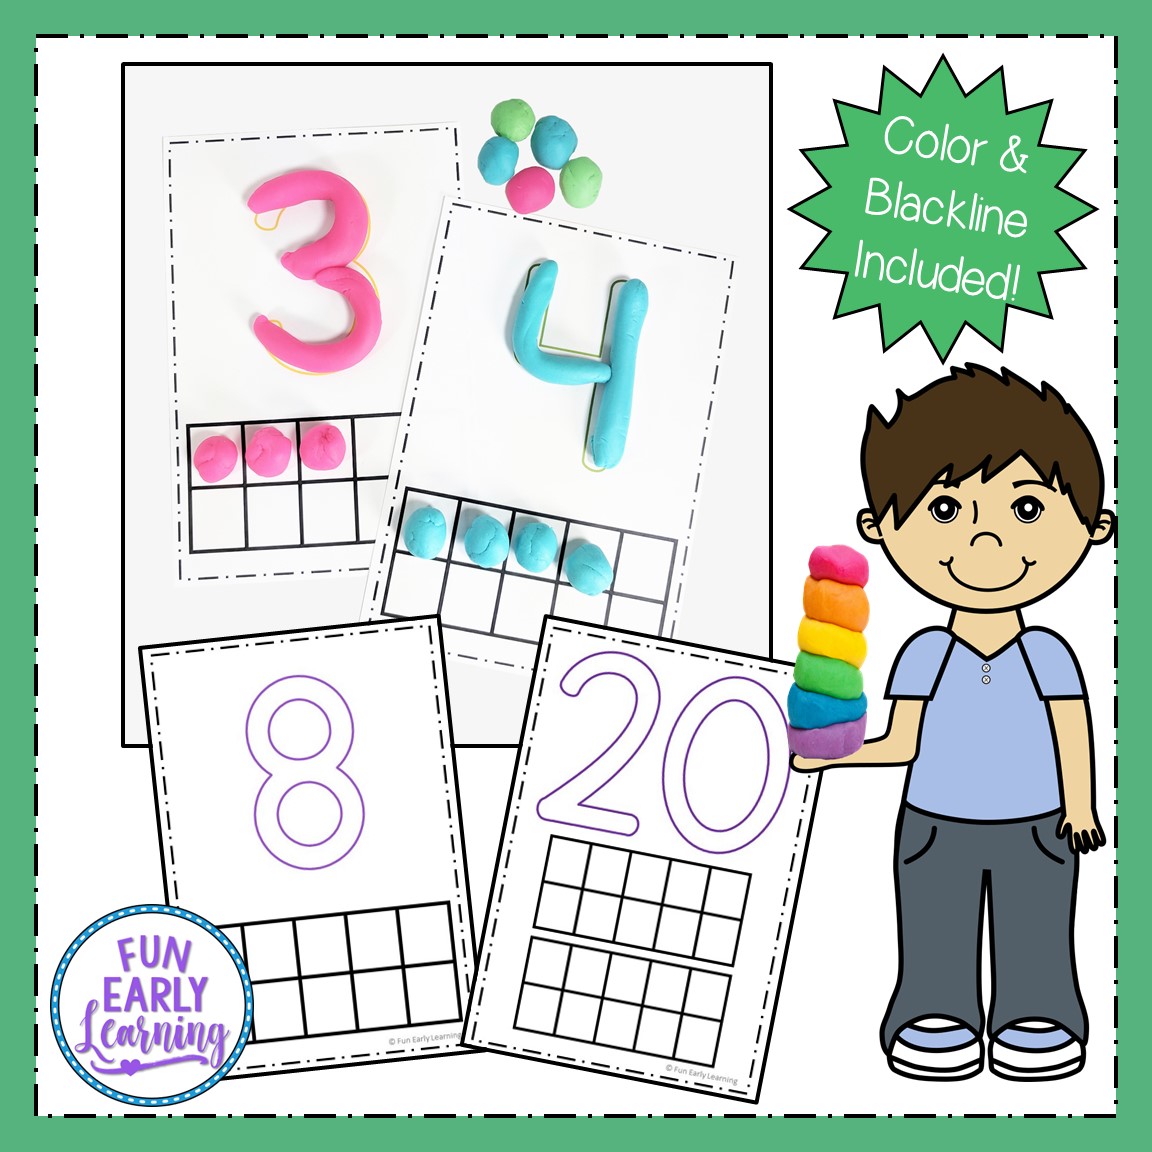 play-dough-number-mats-for-numbers-1-20-early-math-activity